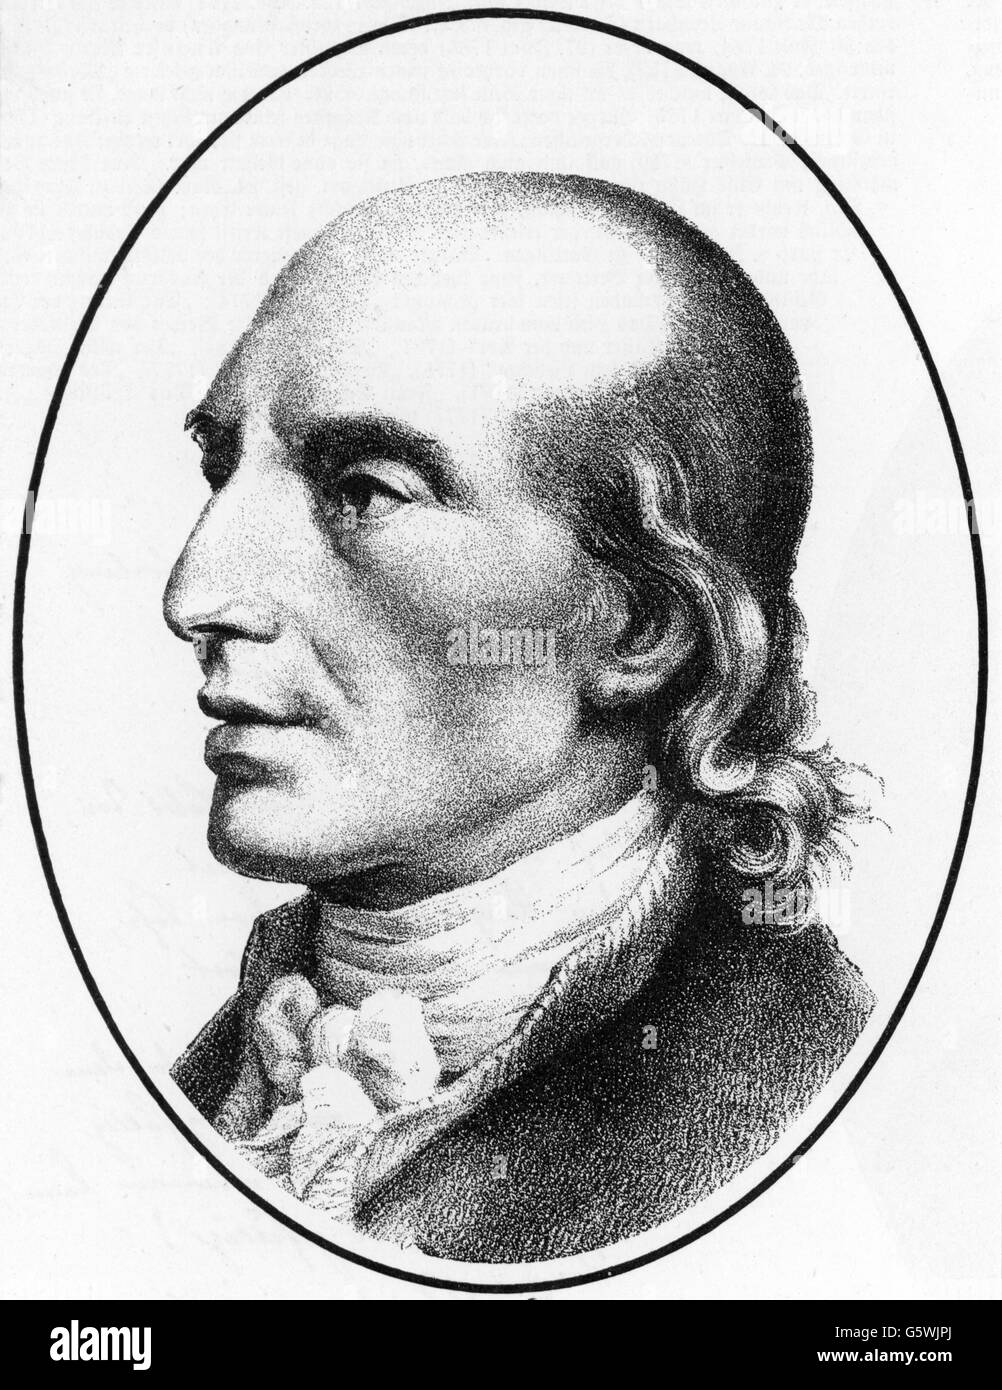 Voss, Johann Heinrich, 20.2.1751 - 28.3.1826, German author / writer, portrait, after painting by Johann Heinrich Wilhelm Tischbein (1751 - 1829), lithograph by W.Unger, 1826, 19th century, graphic, poet, translator, frontal baldness, cravat, signature, signature, Artist's Copyright has not to be cleared Stock Photo